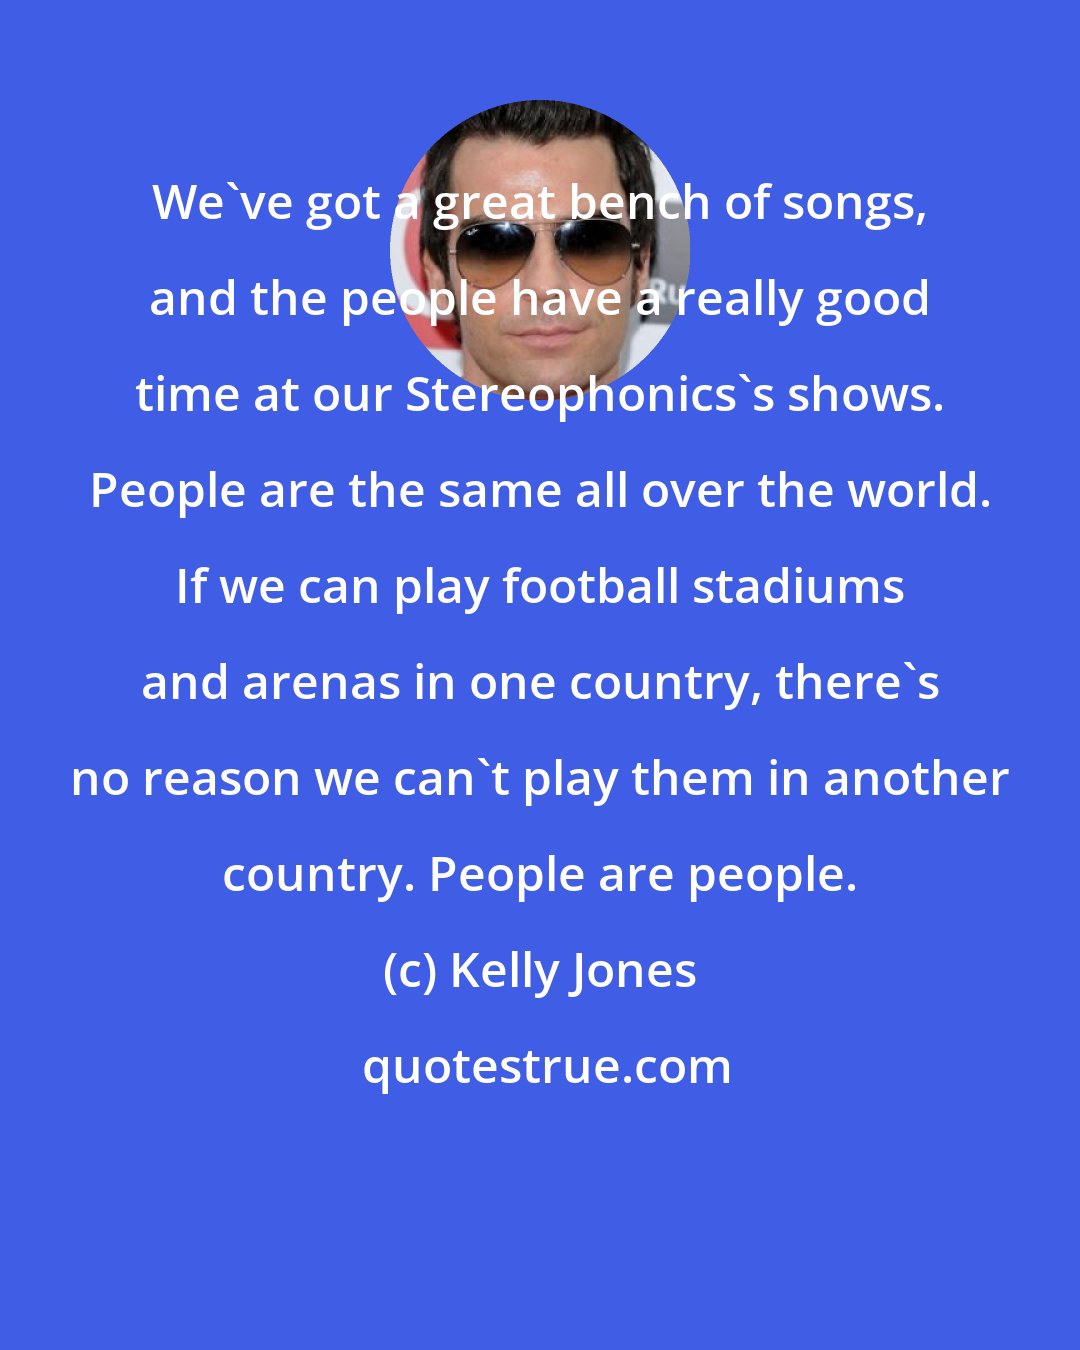 Kelly Jones: We've got a great bench of songs, and the people have a really good time at our Stereophonics's shows. People are the same all over the world. If we can play football stadiums and arenas in one country, there's no reason we can't play them in another country. People are people.